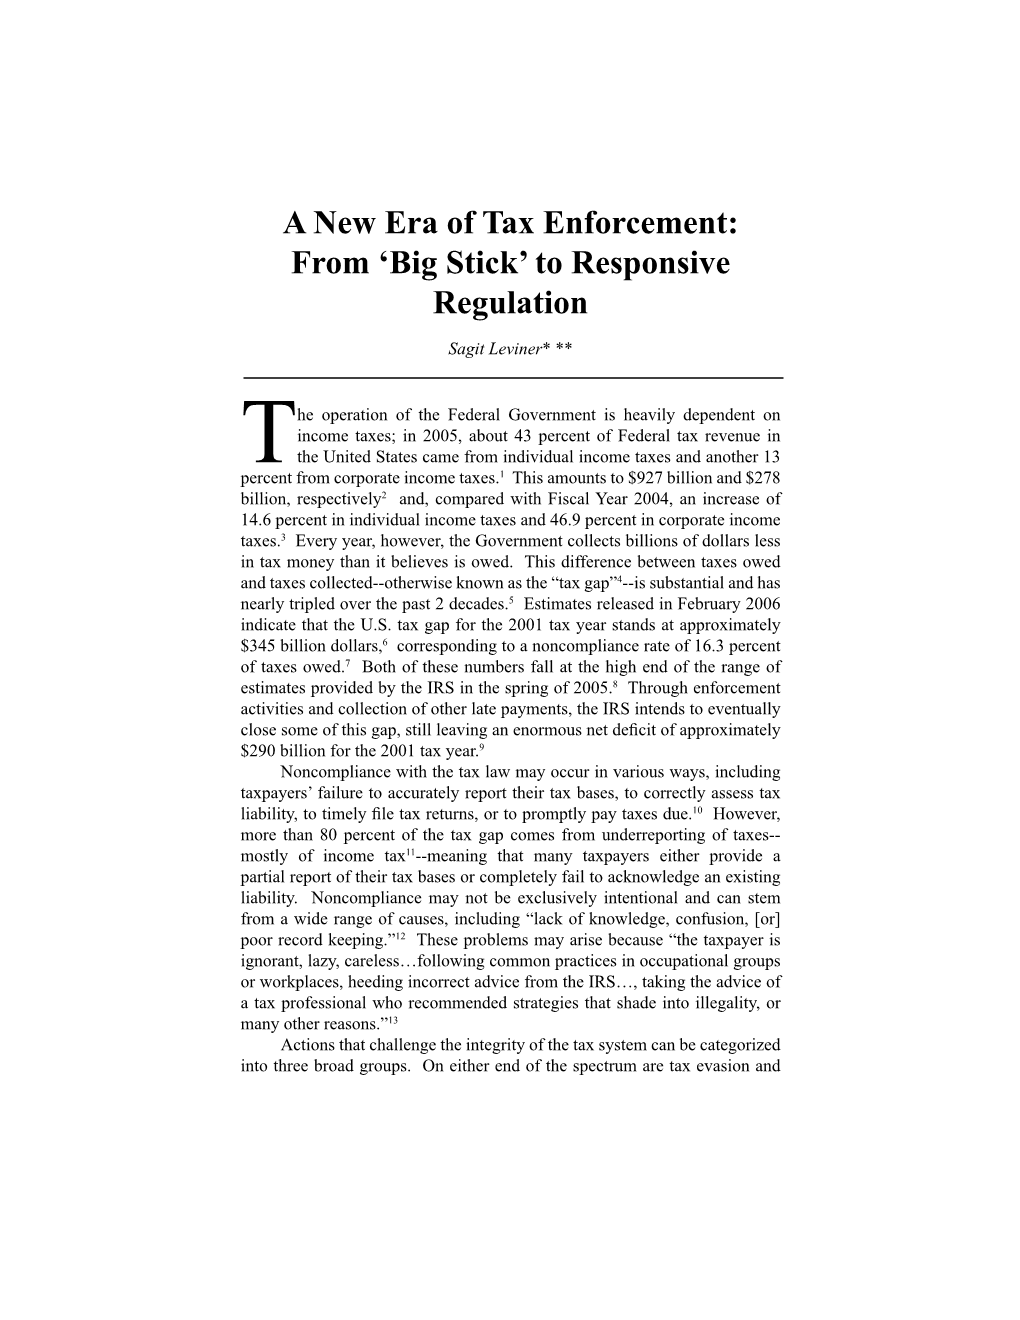 A New Era of Tax Enforcement: from 'Big Stick' to Responsive Regulation